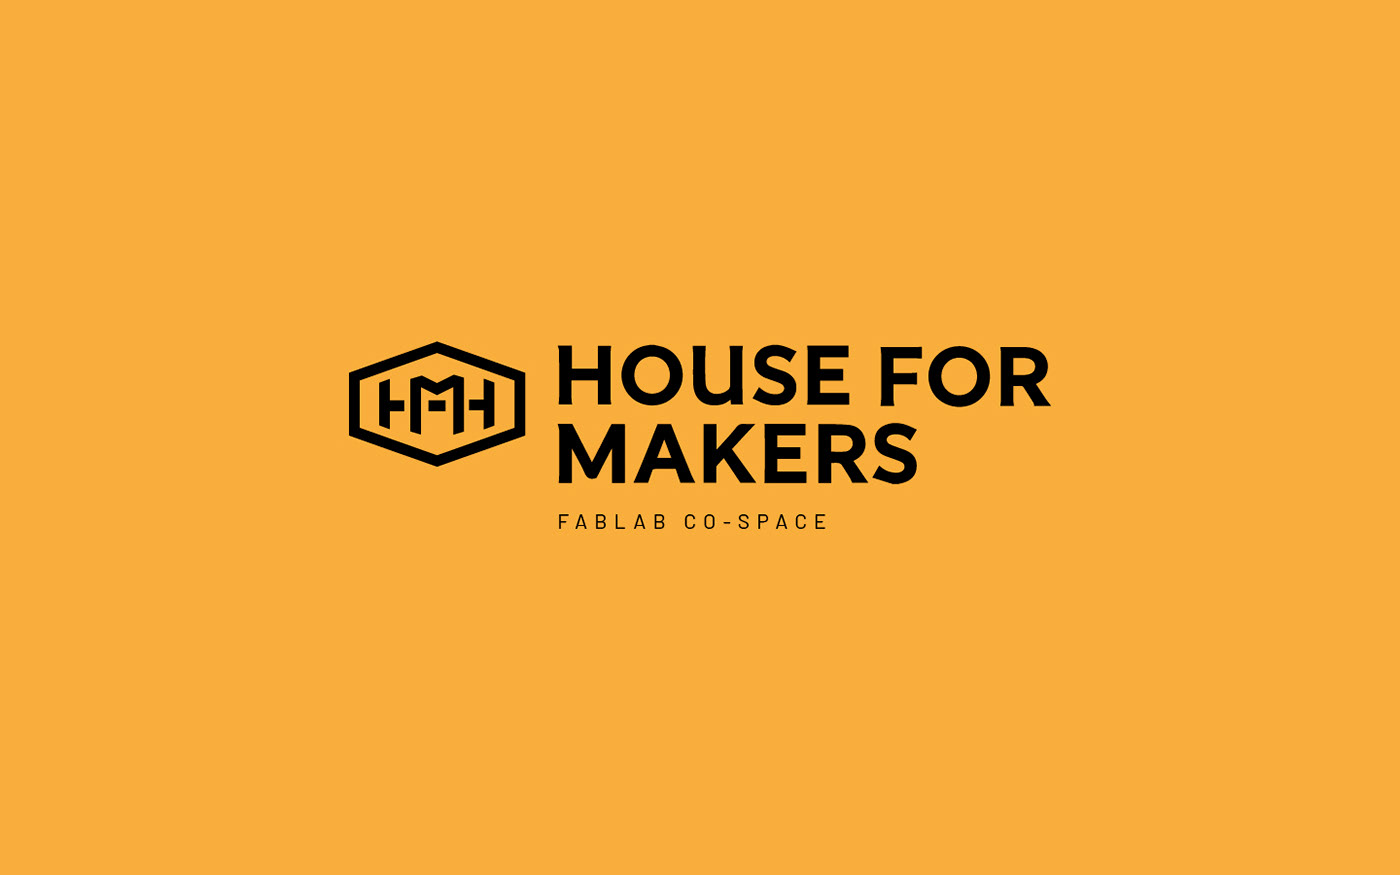 coworking fab lab workspace makers Prototyping Workshop manufacturing studio industrial business office